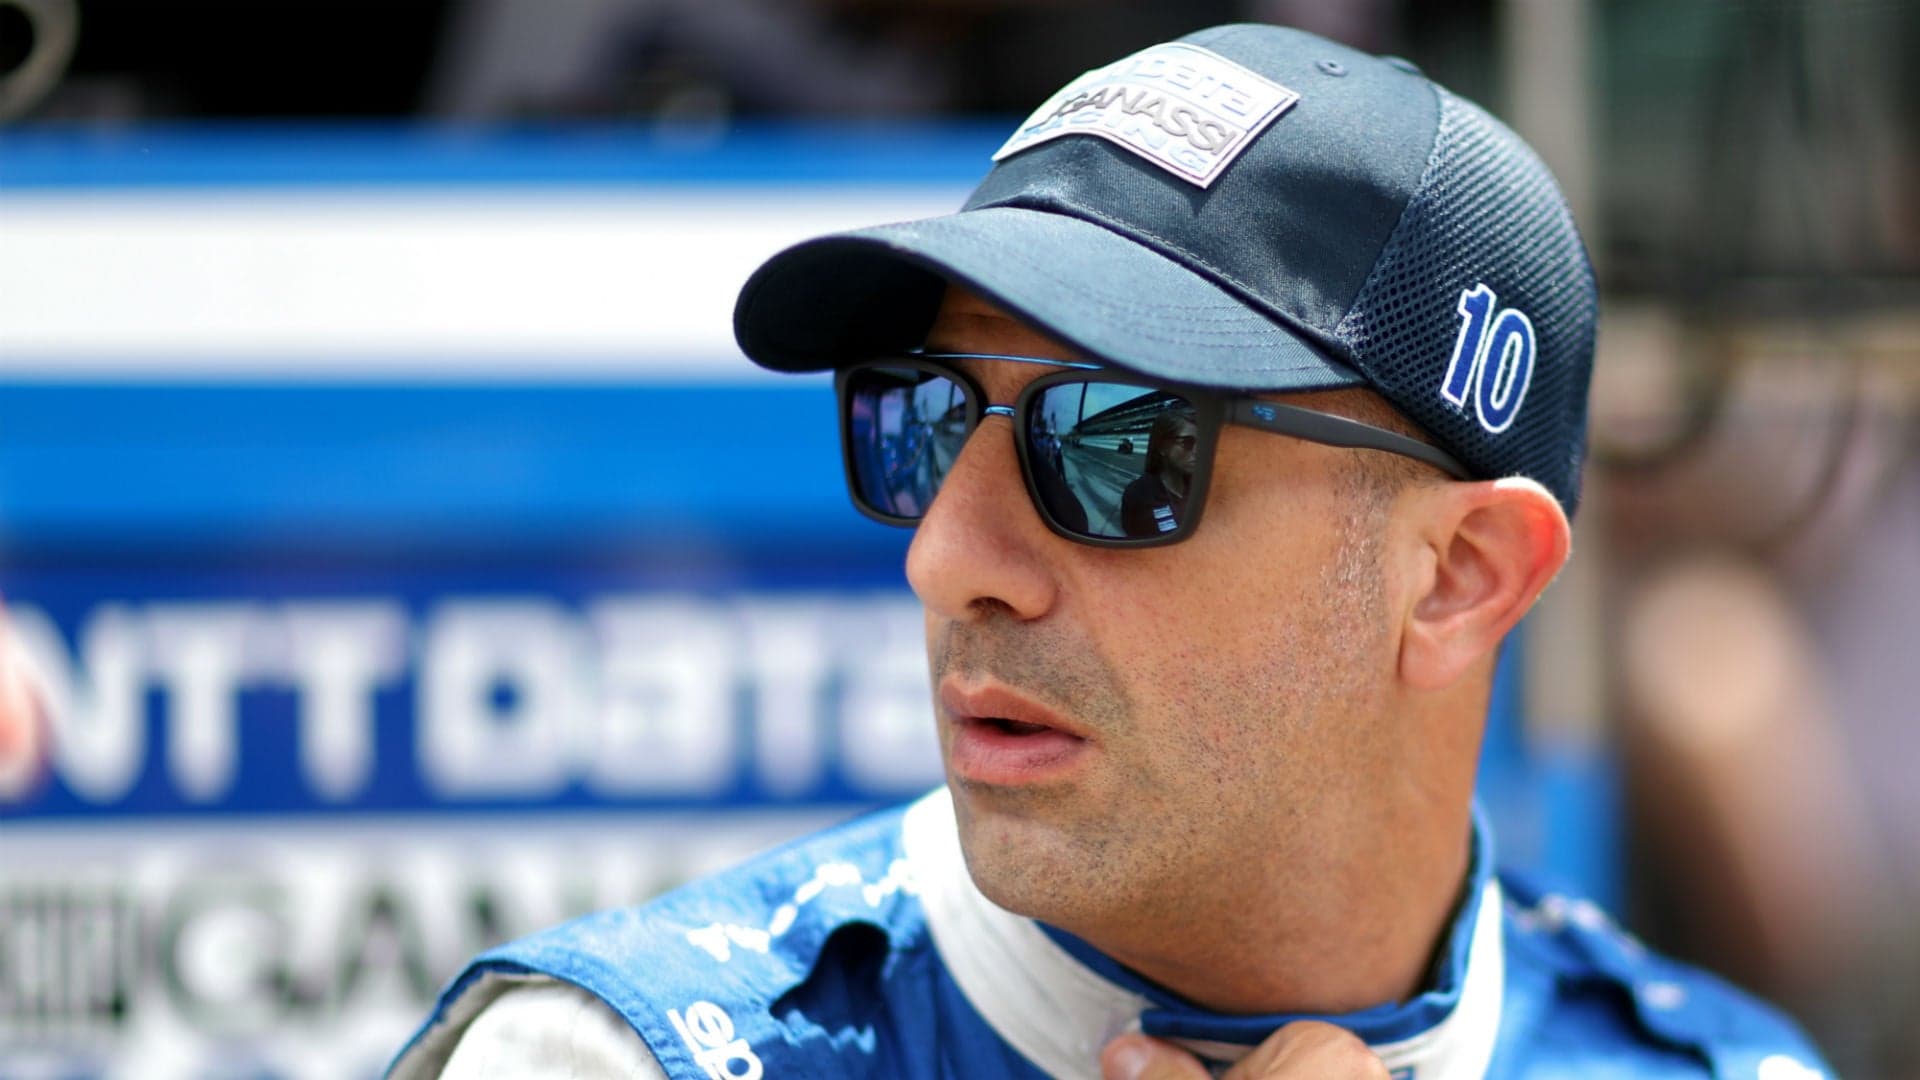 Tony Kanaan Confirmed for Ford GT Drive at 2018 24 Hours of Le Mans